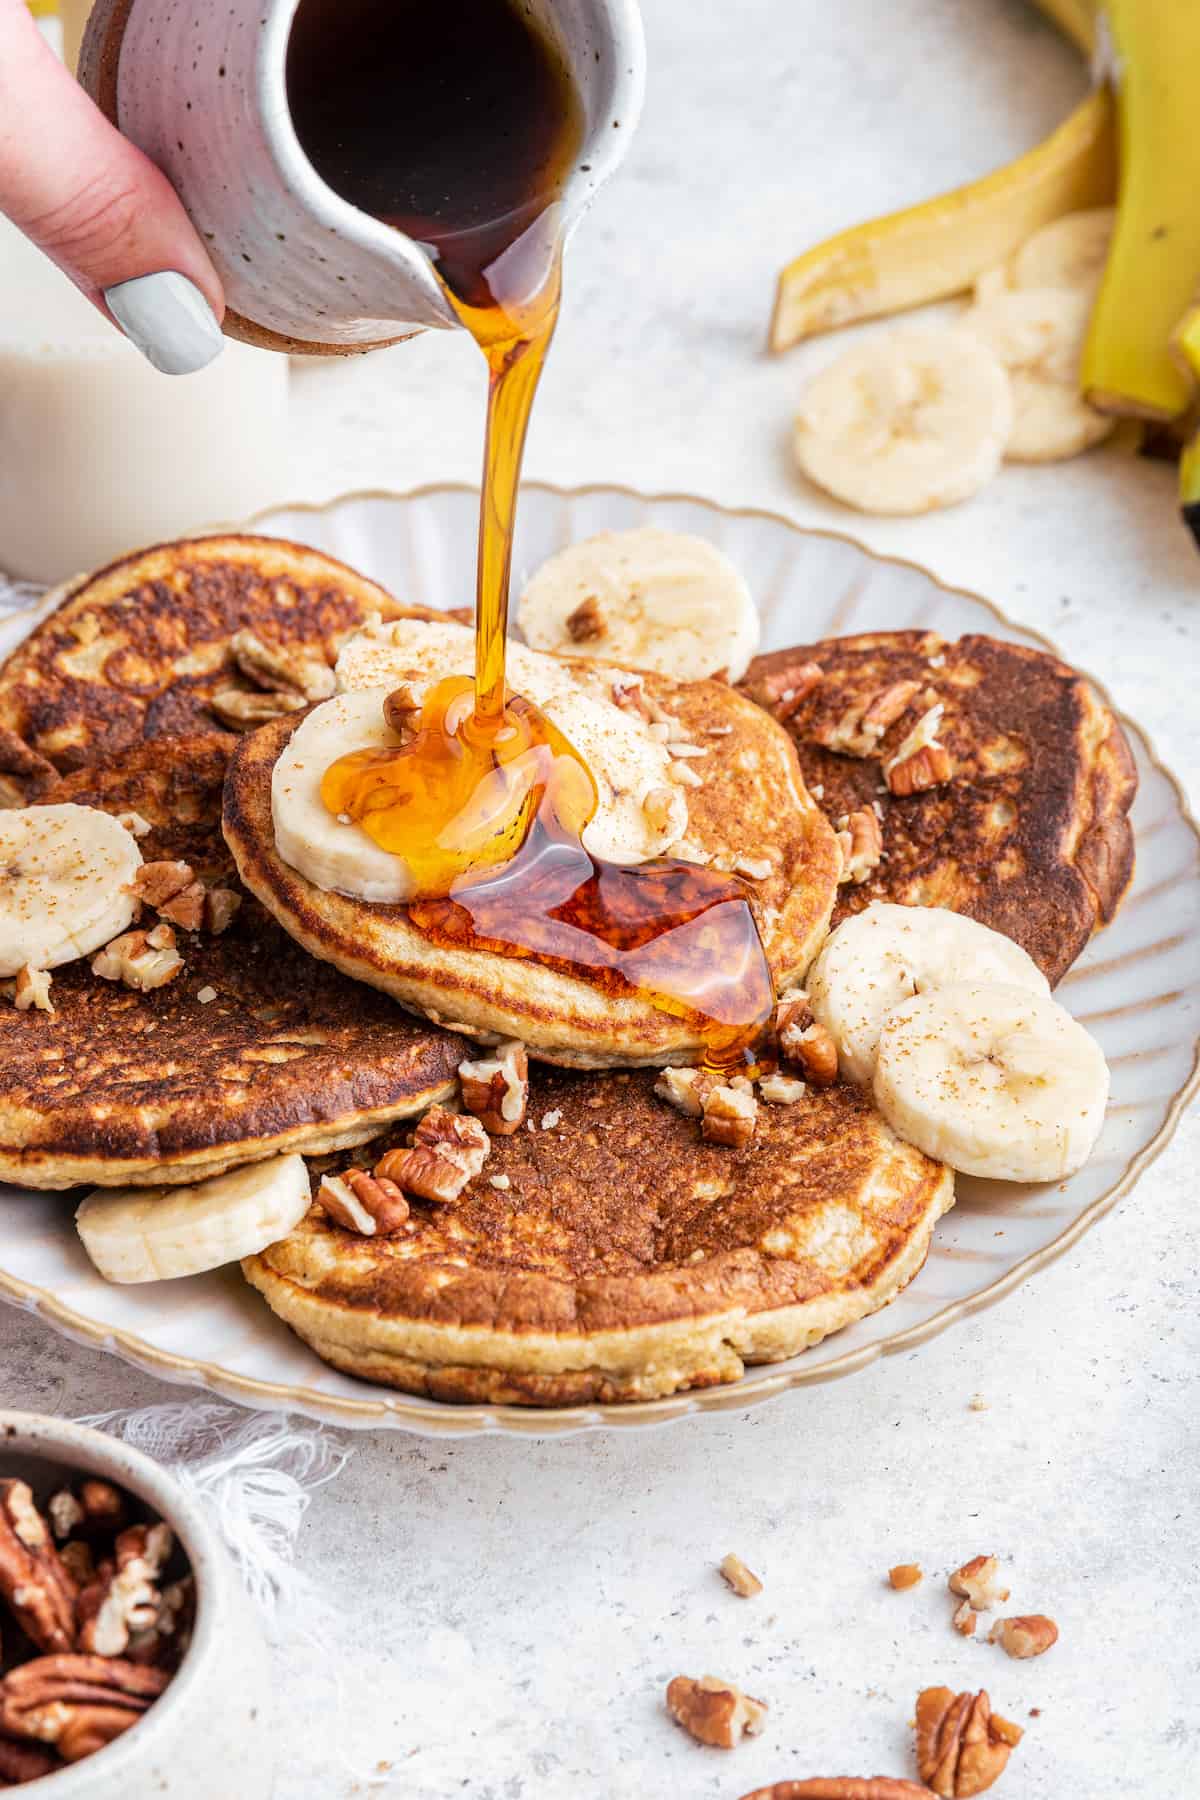 Pouring maple syrup onto plate of oatmeal banana pancakes